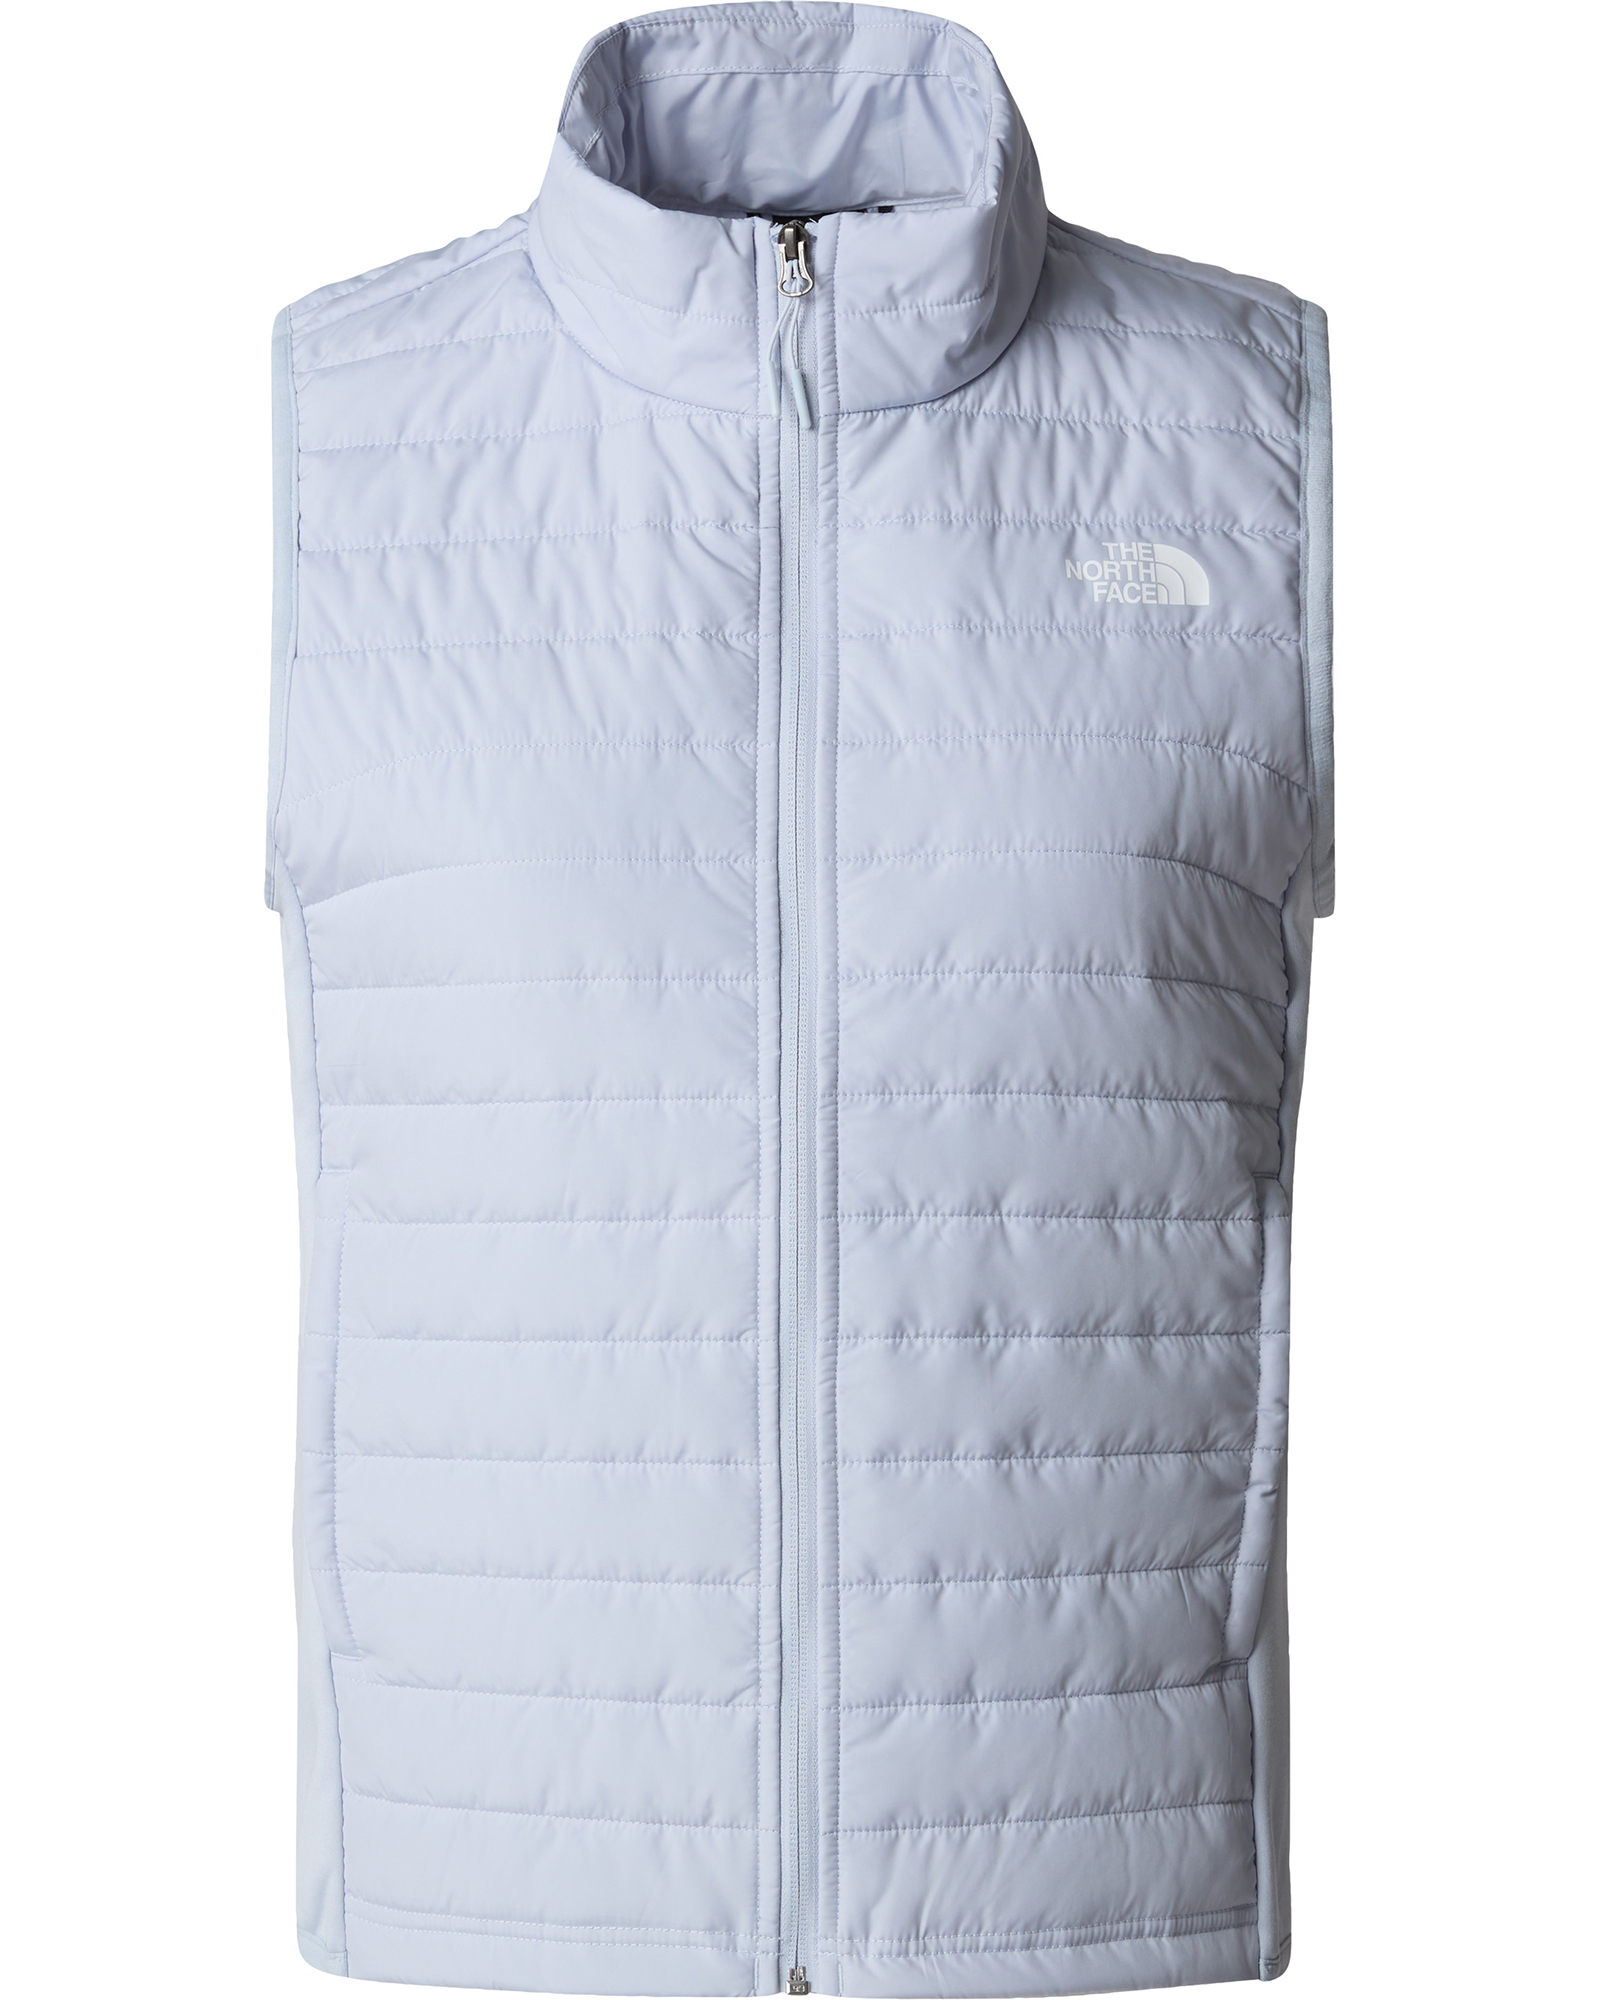 The North Face Canyonlands Hybrid Women’s Vest - Dusty Periwinkle XS